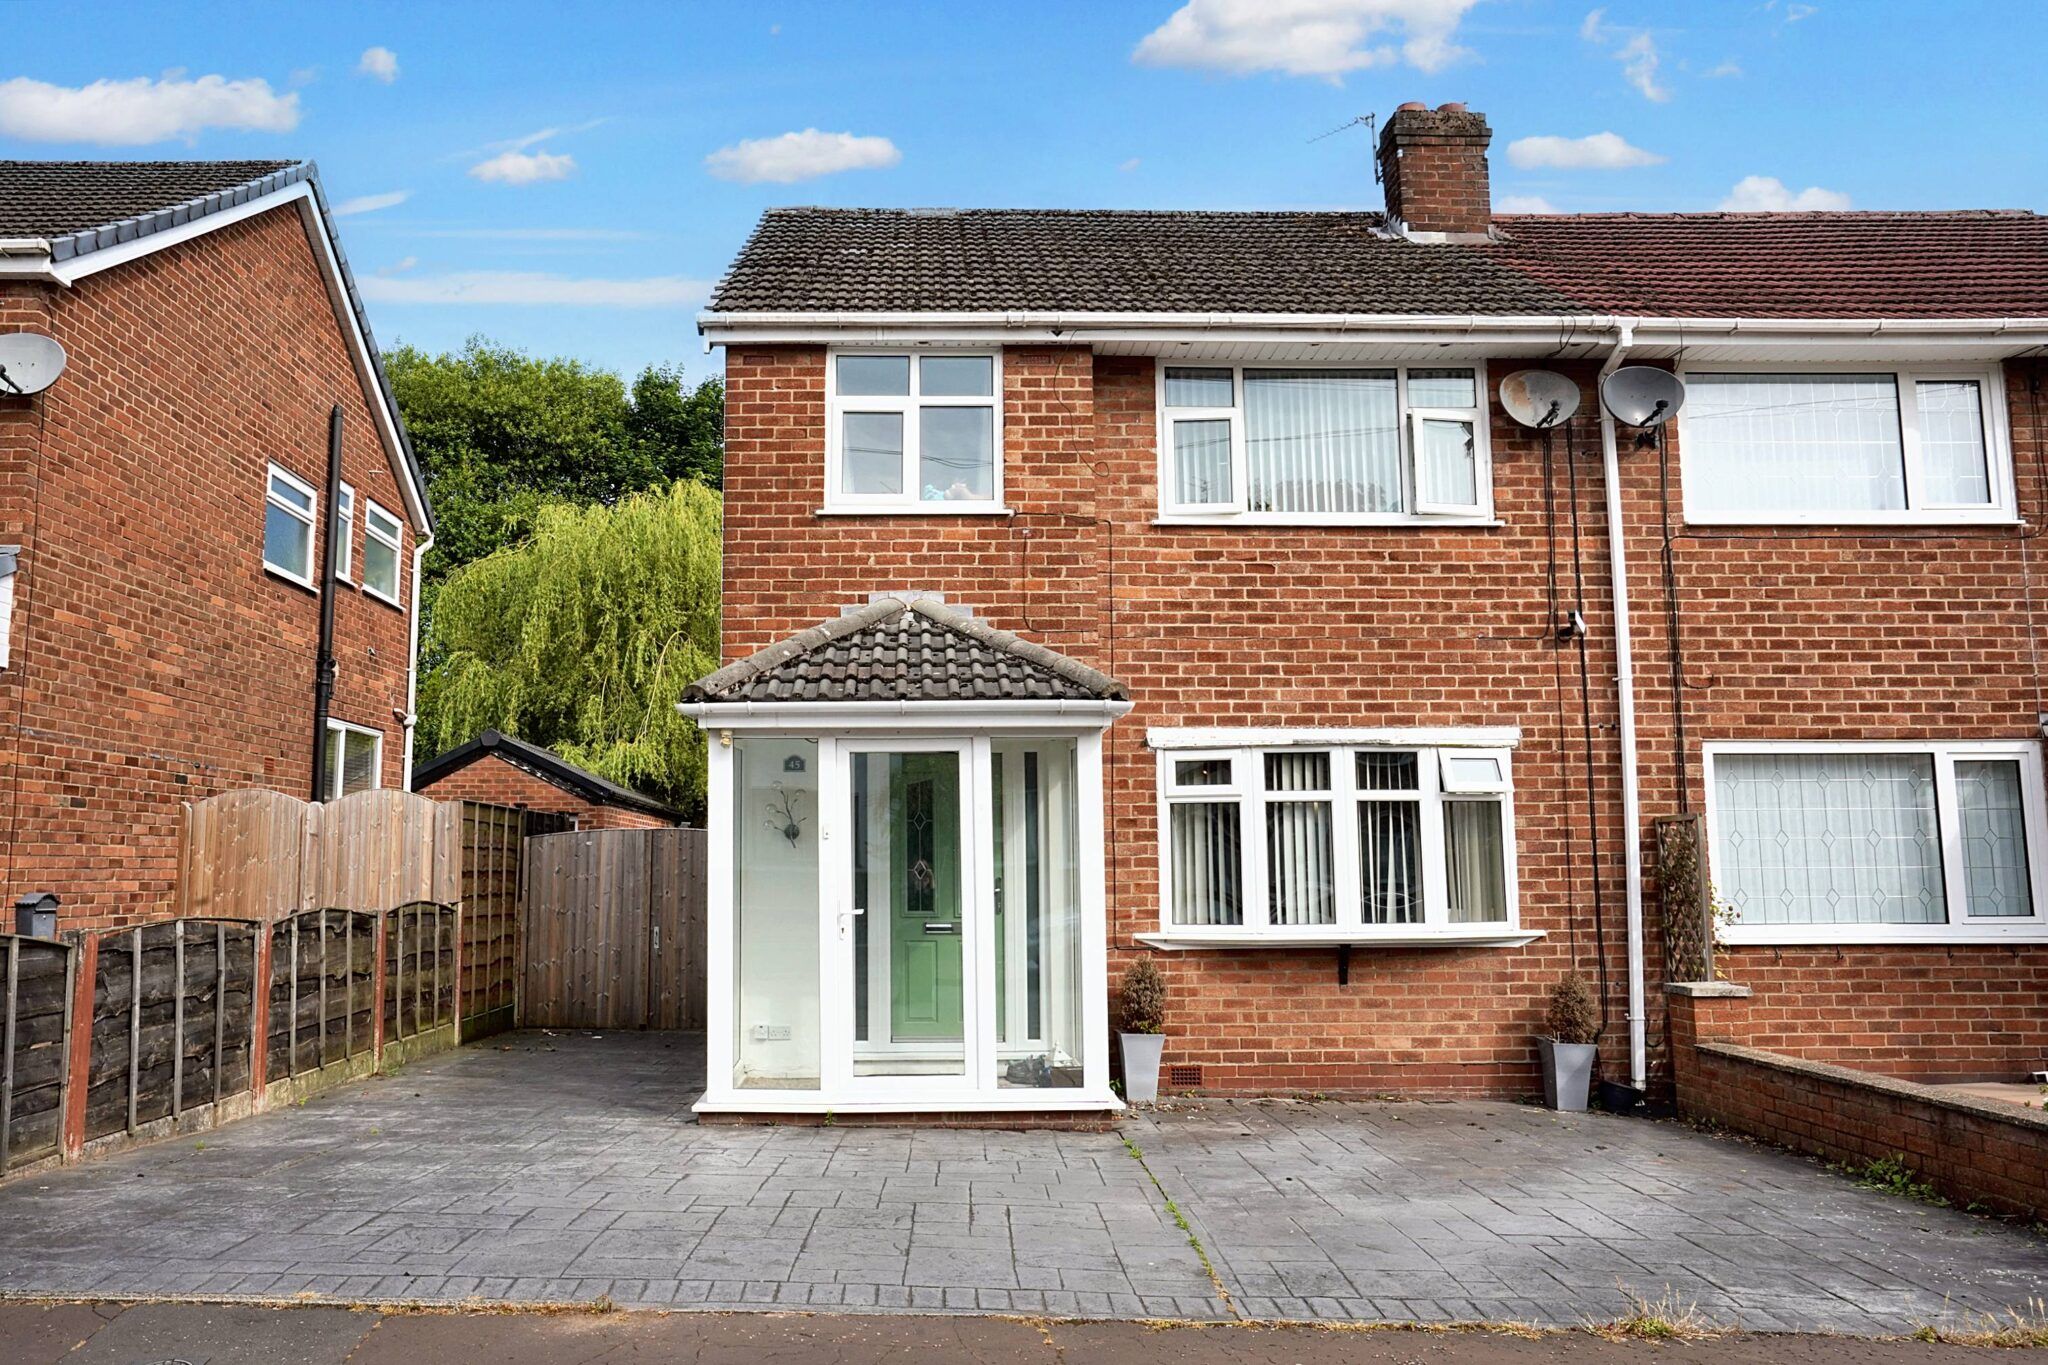 Peveril Close, Whitefield, Manchester, Manchester, M45 6NS